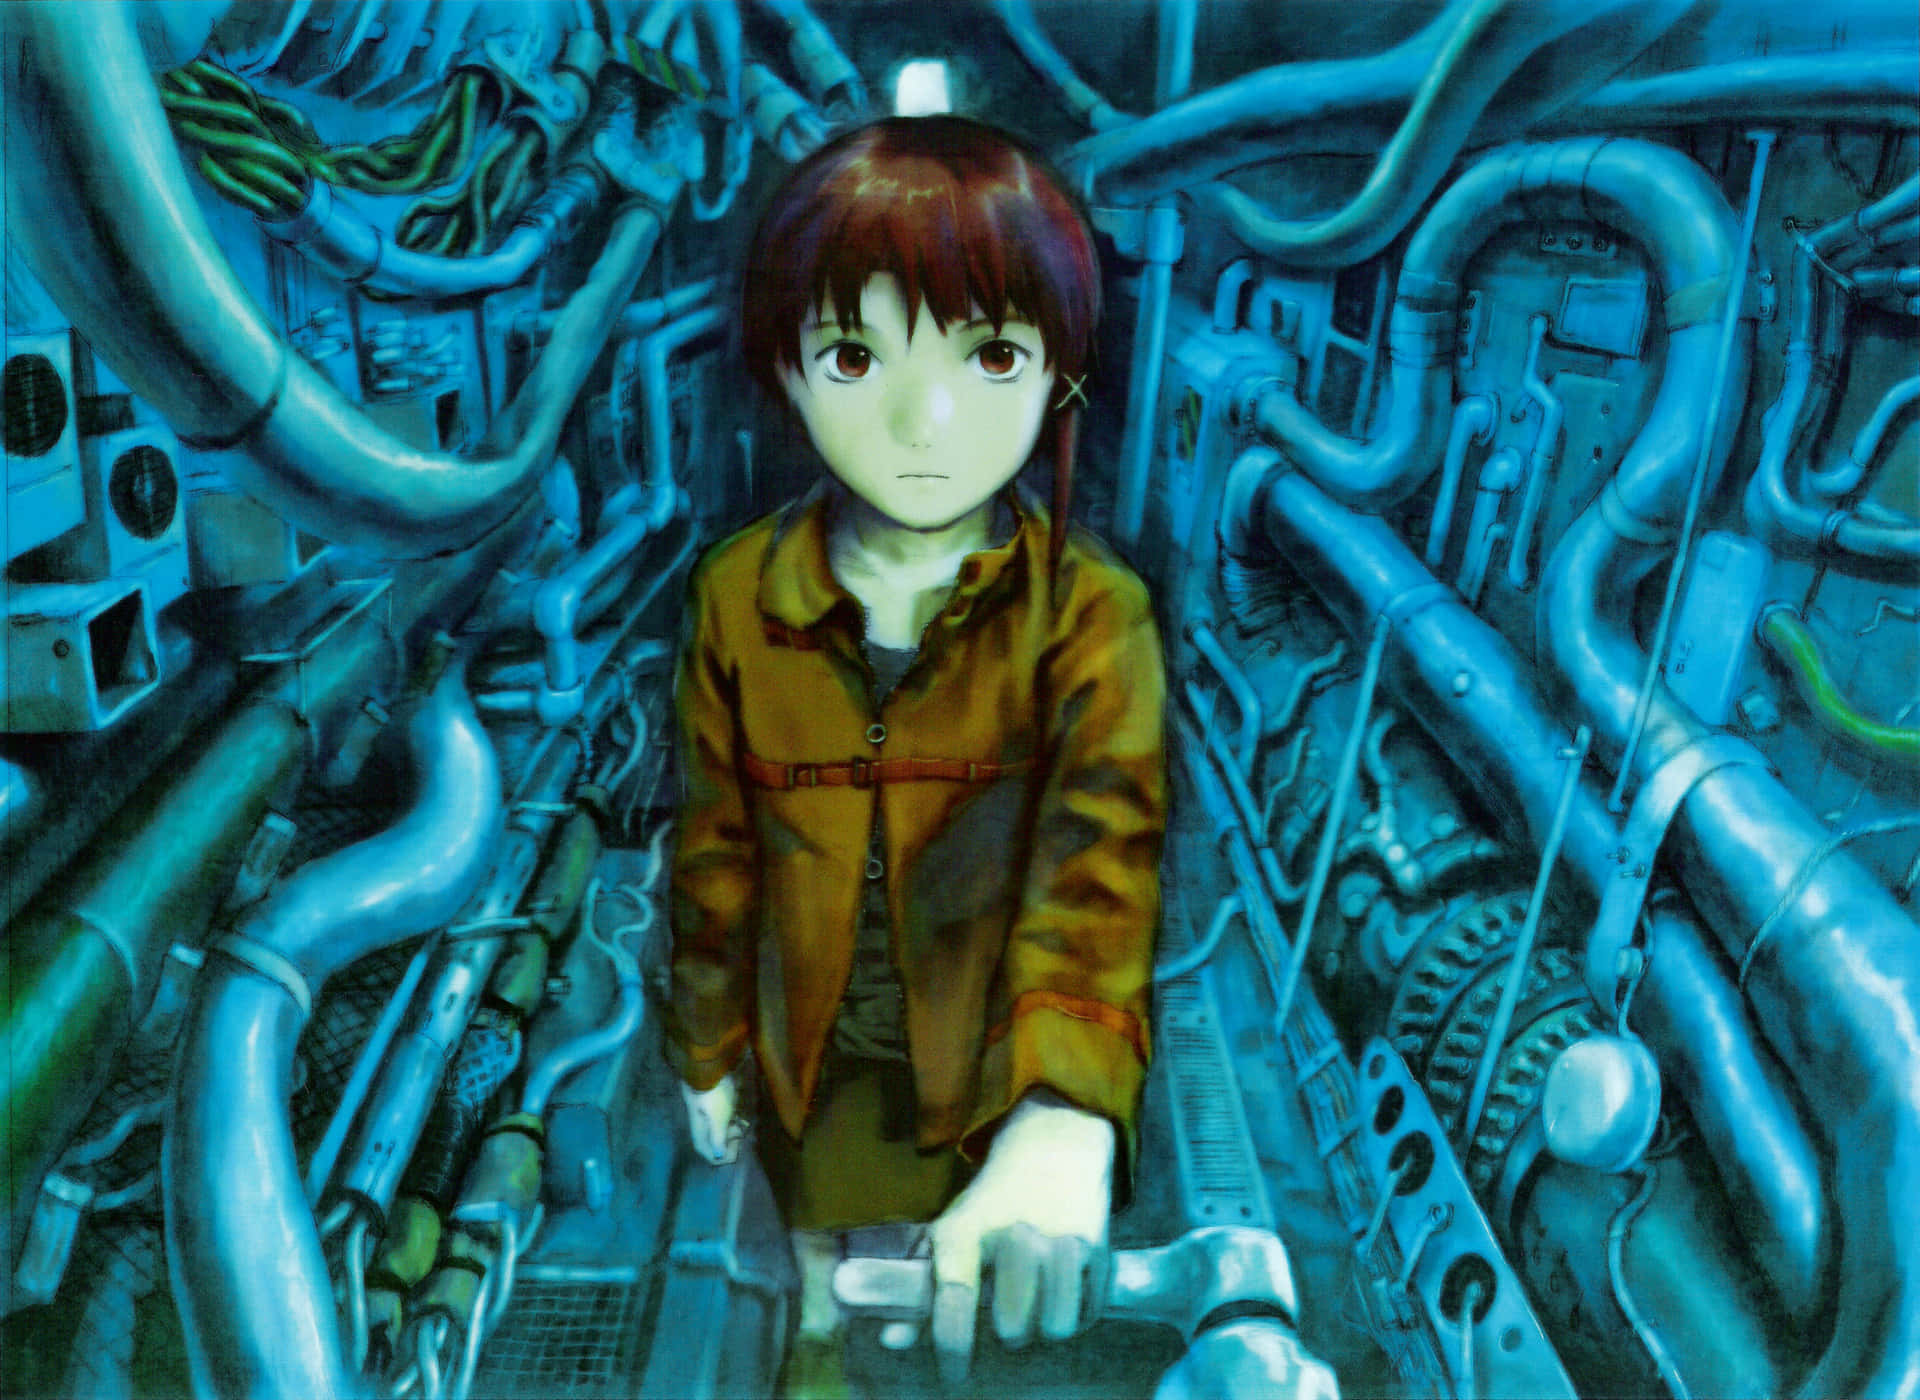 Finding the Invisible God inSerial Experiments Lain  Beneath the Tangles